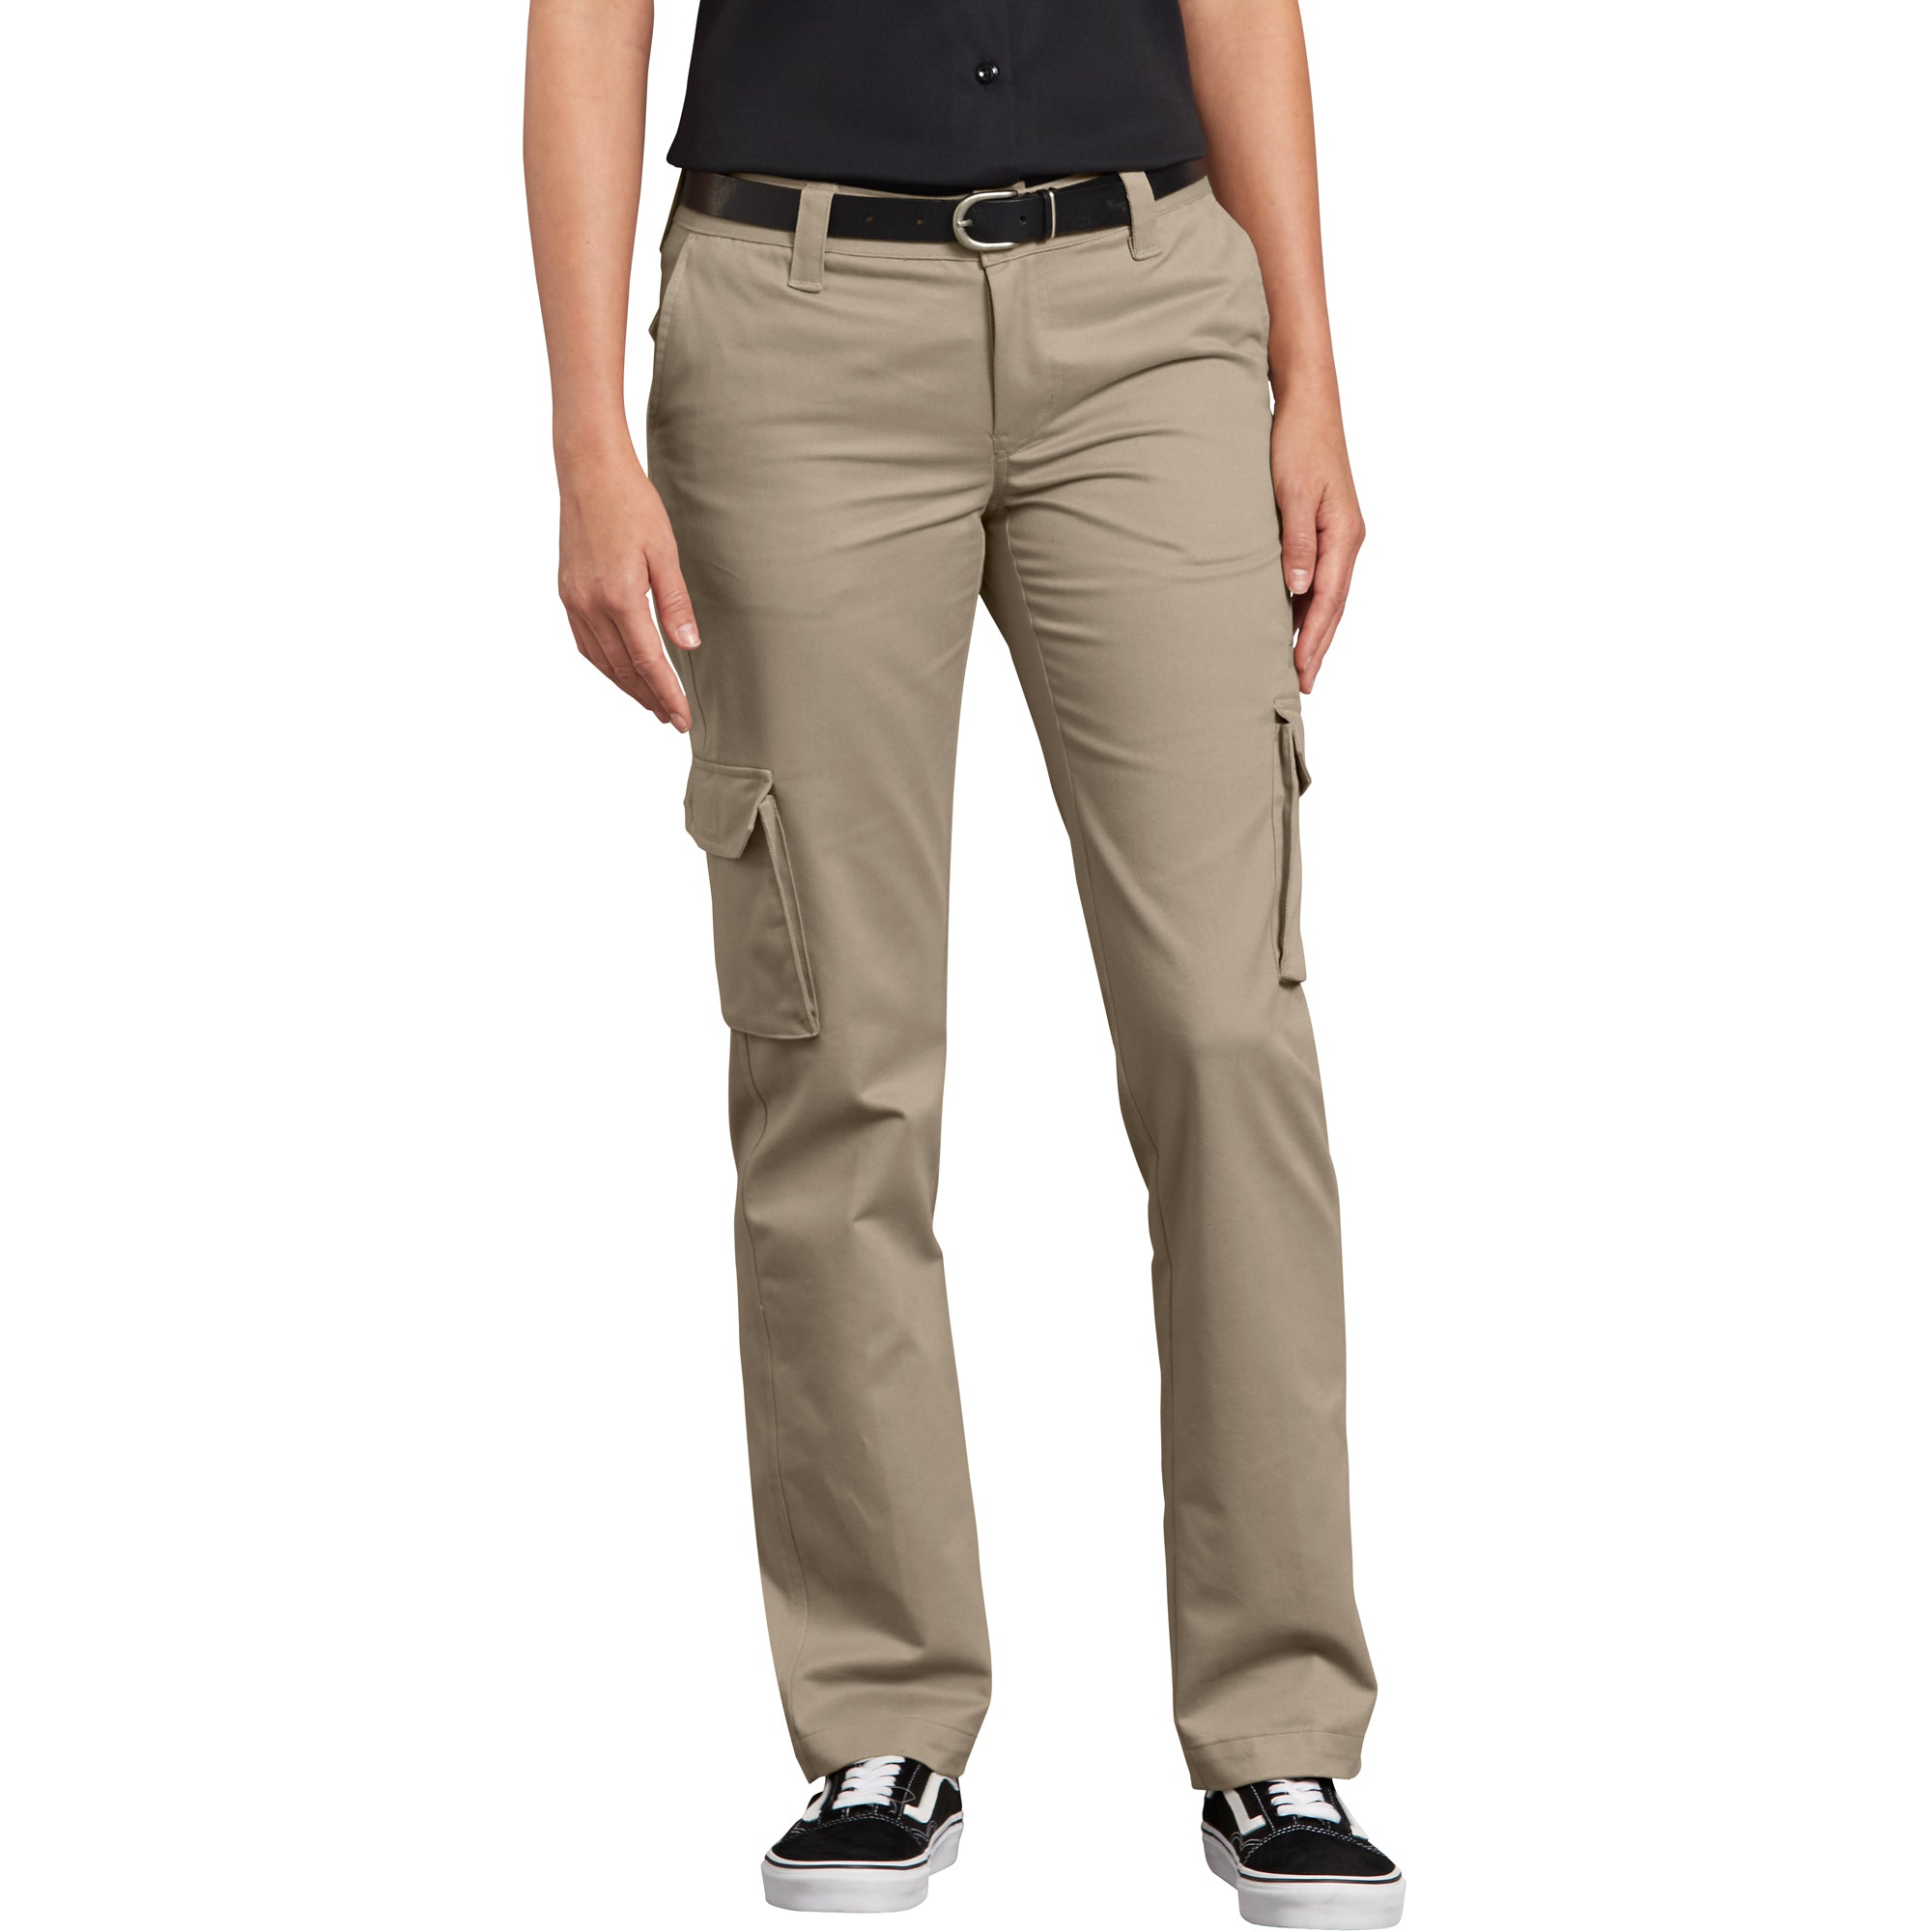 Dickies Women's Navy Xtreme Stretch Mid Rise Drawstring Cargo Pant